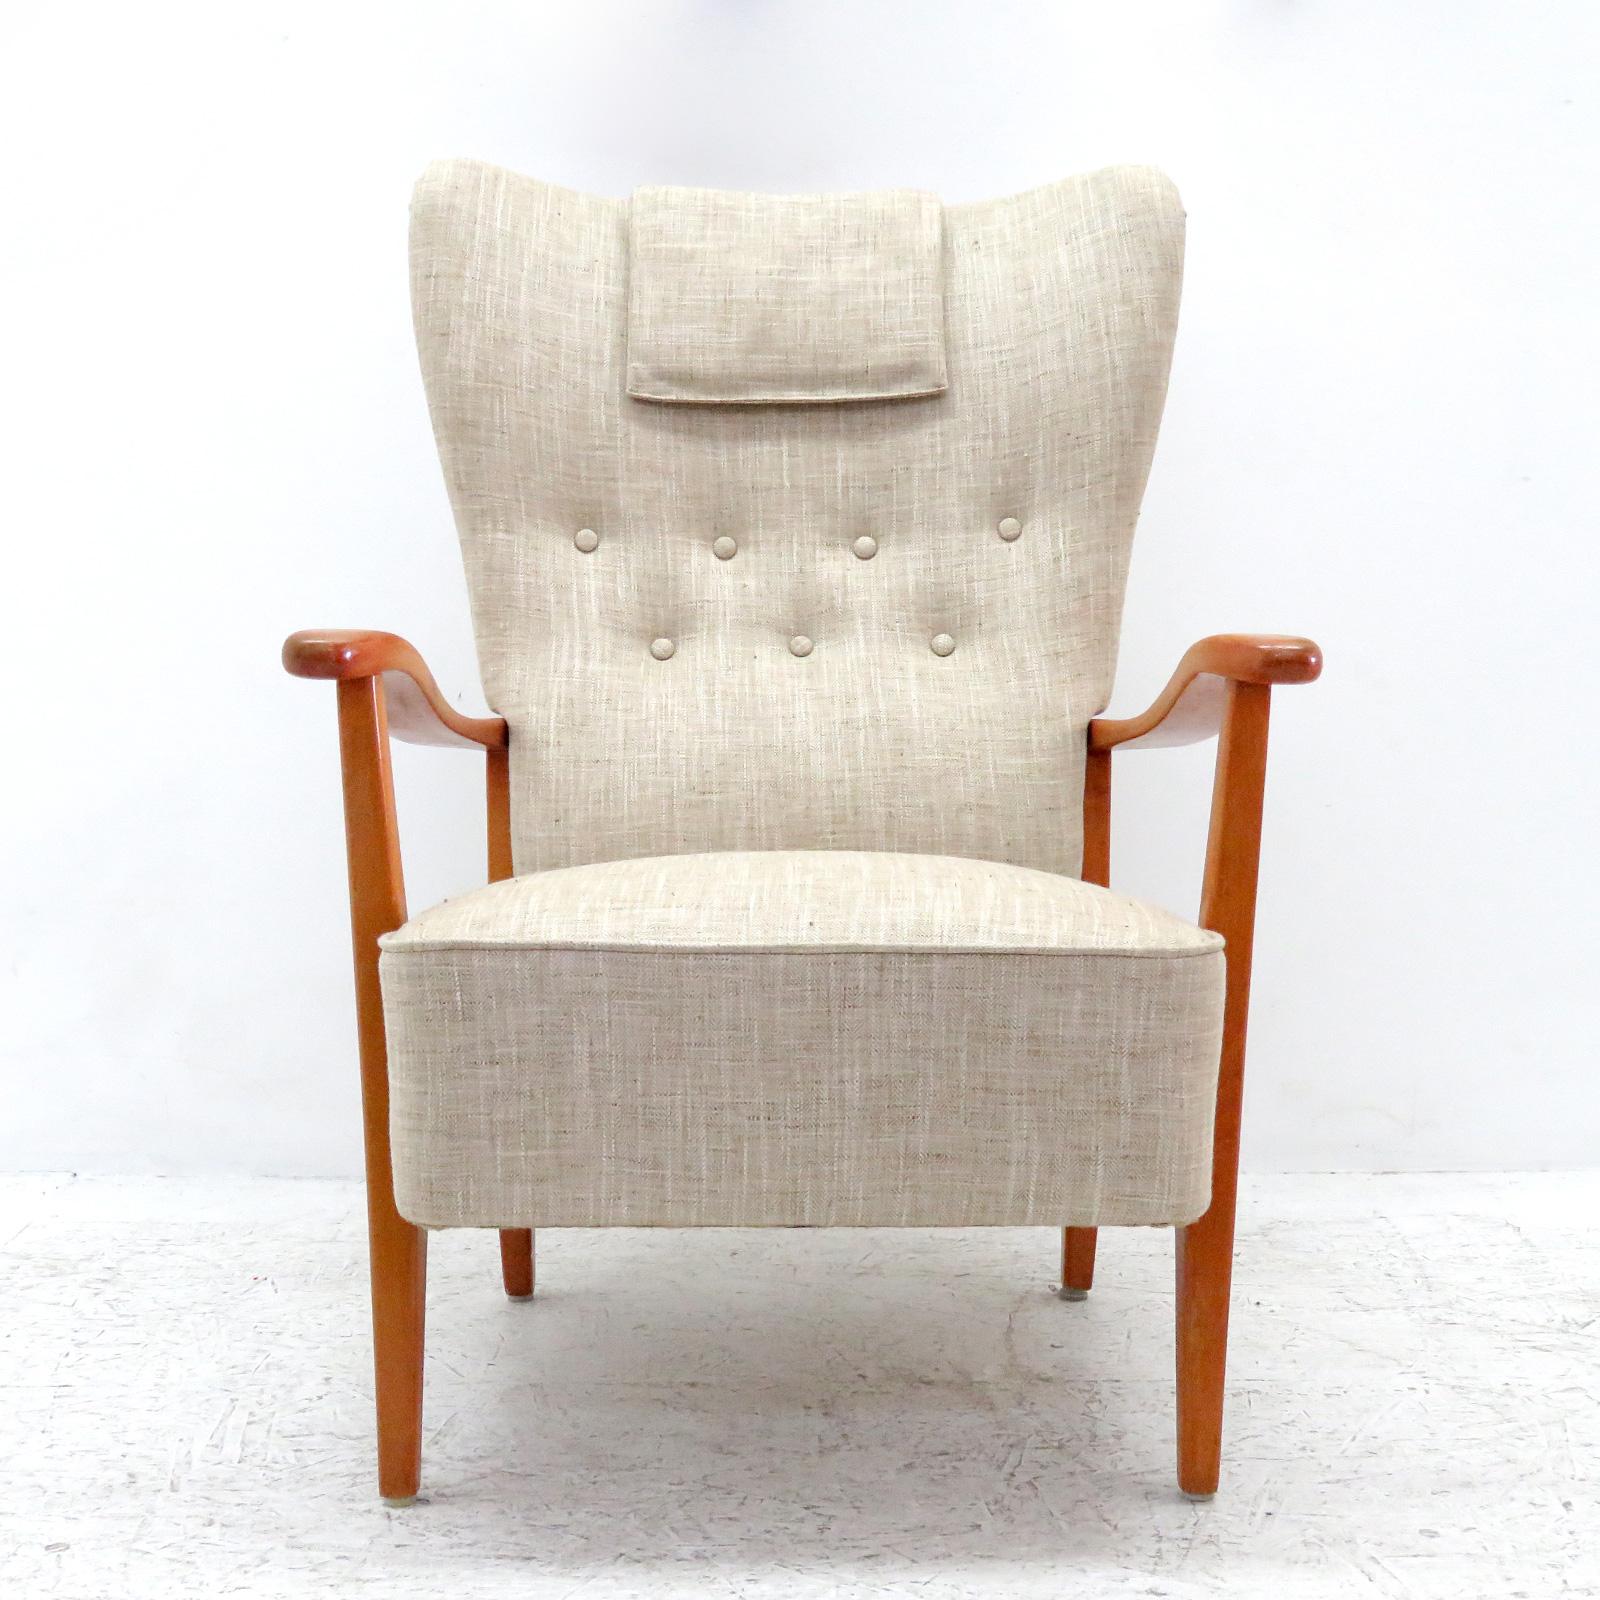 Wonderful Danish modern high back chair by DUX, 1940, sculptural stained beech frame with professionally reupholstered body, the concave wing back is tufted and the seat is spring supported, with detachable head rest cushion, marked. (See also